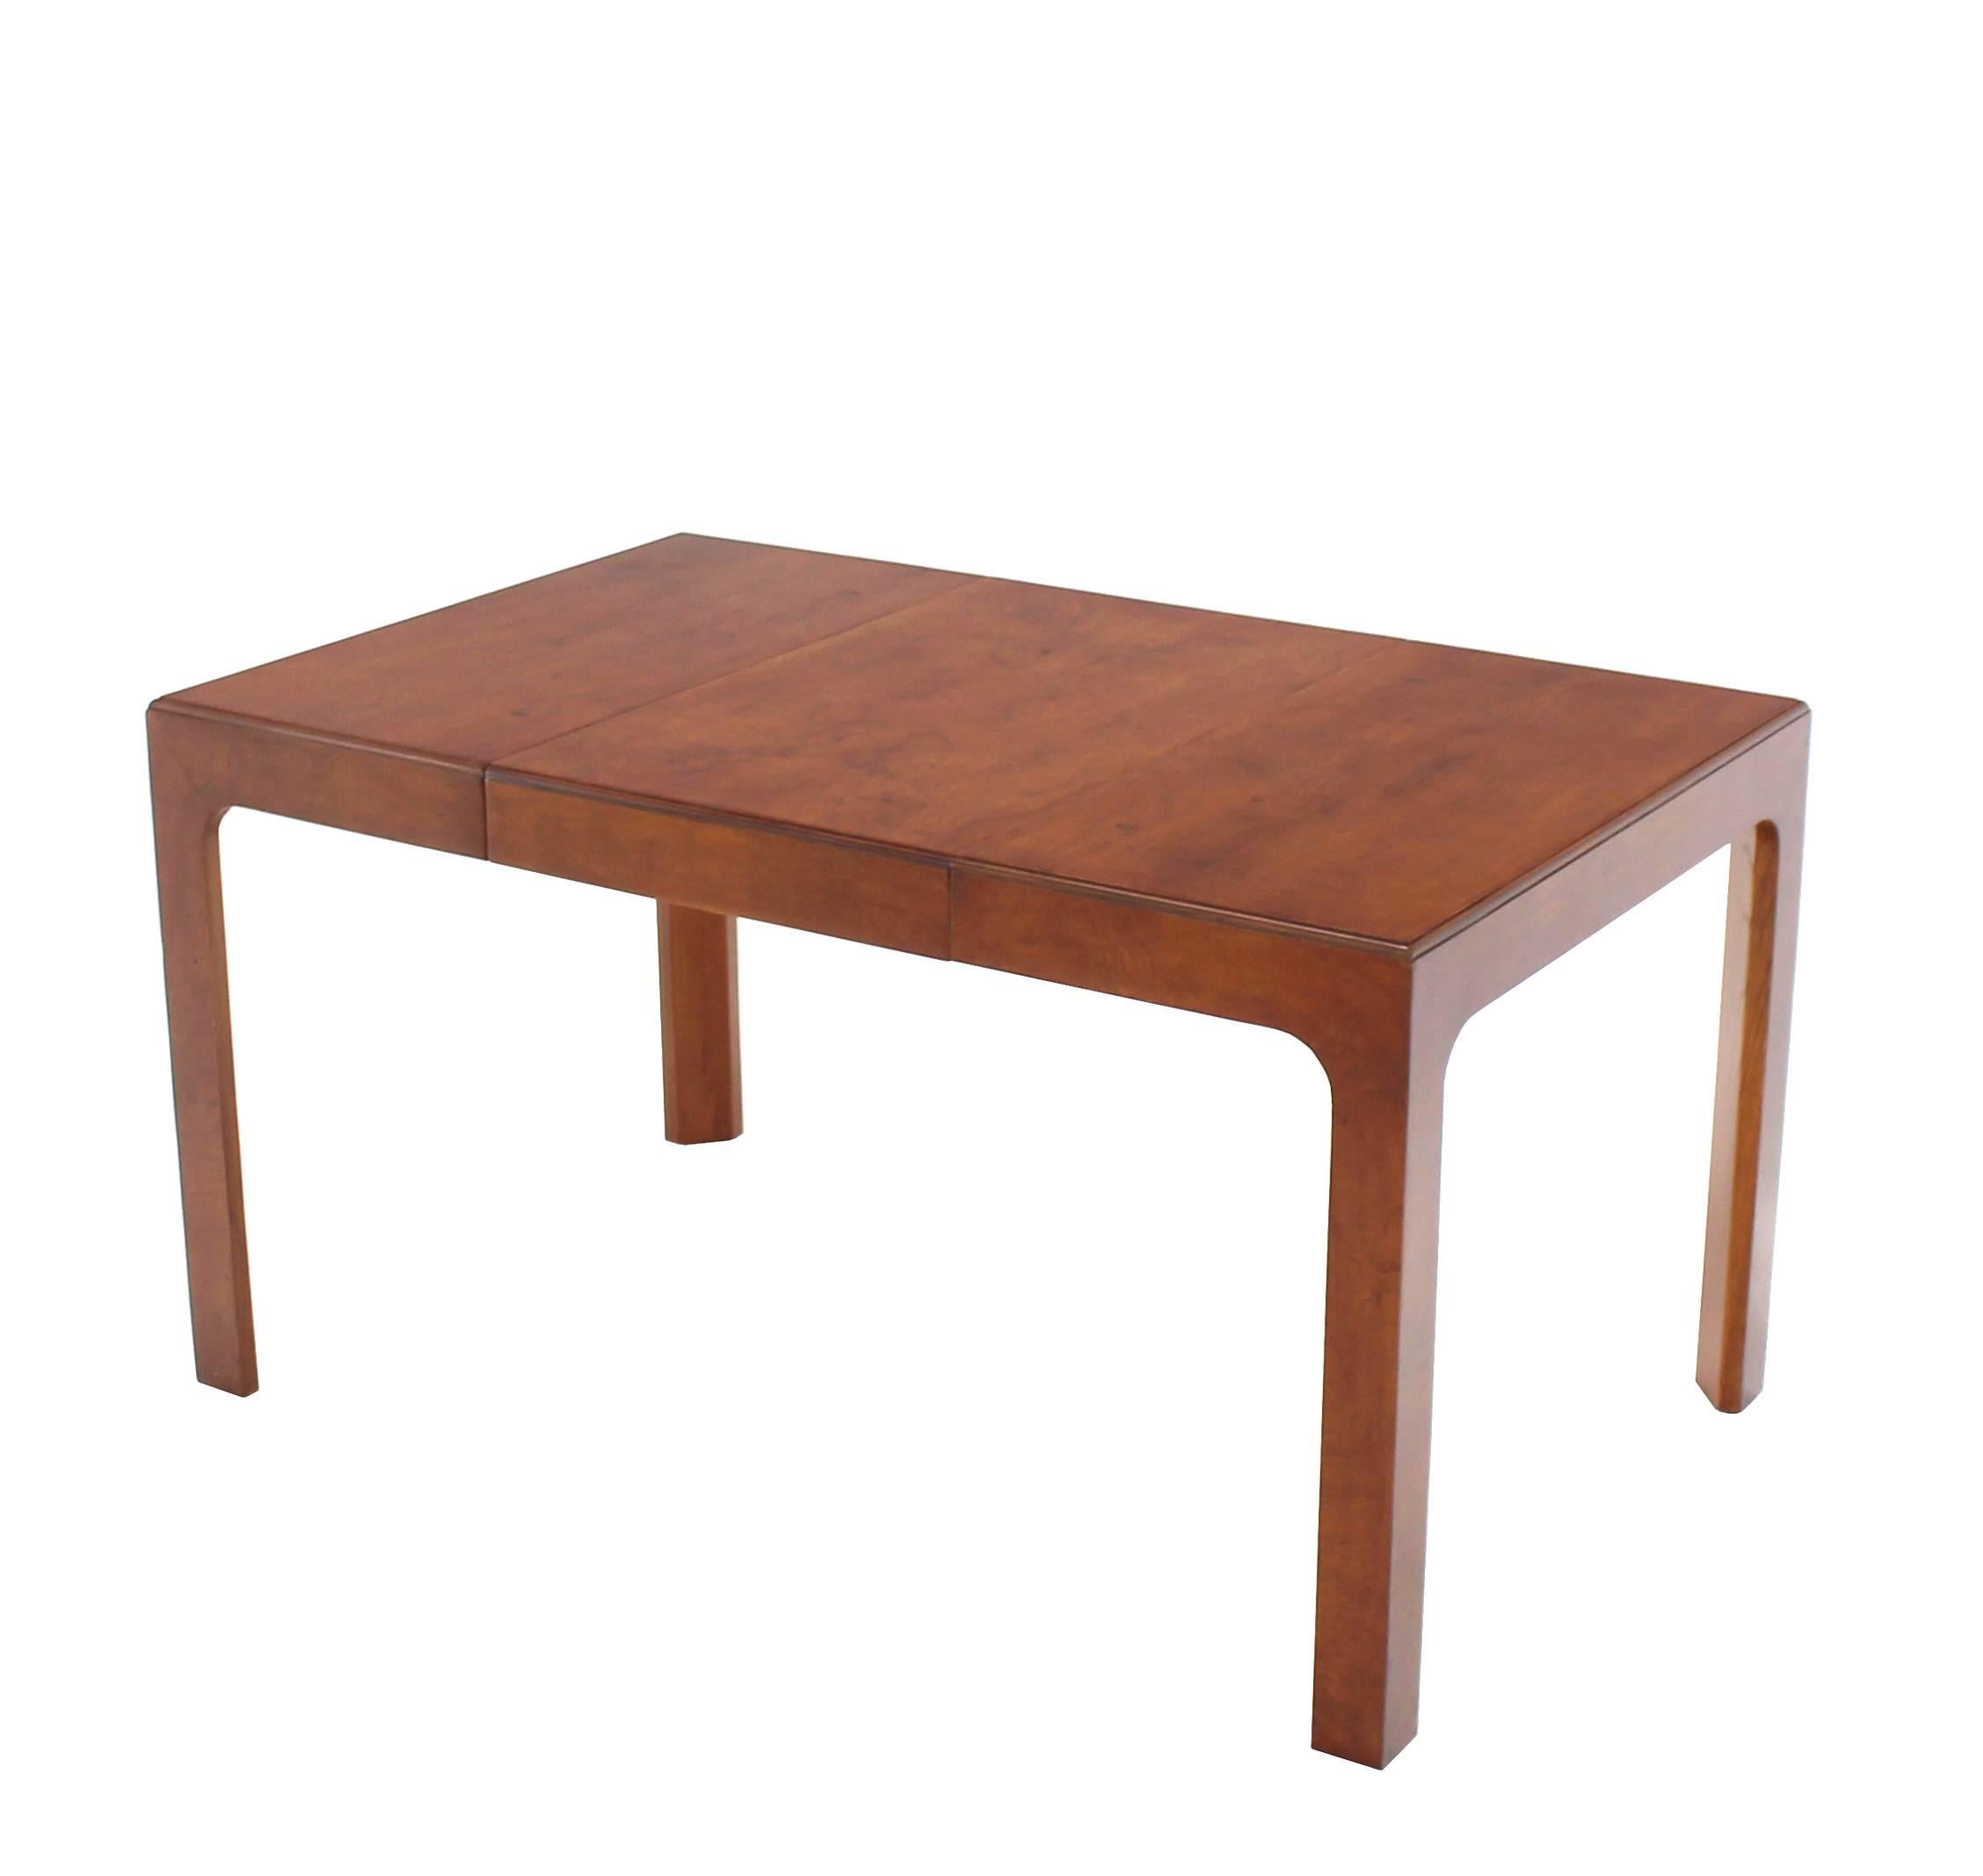 20th Century Henredon Square Dining Table with One Extension Board